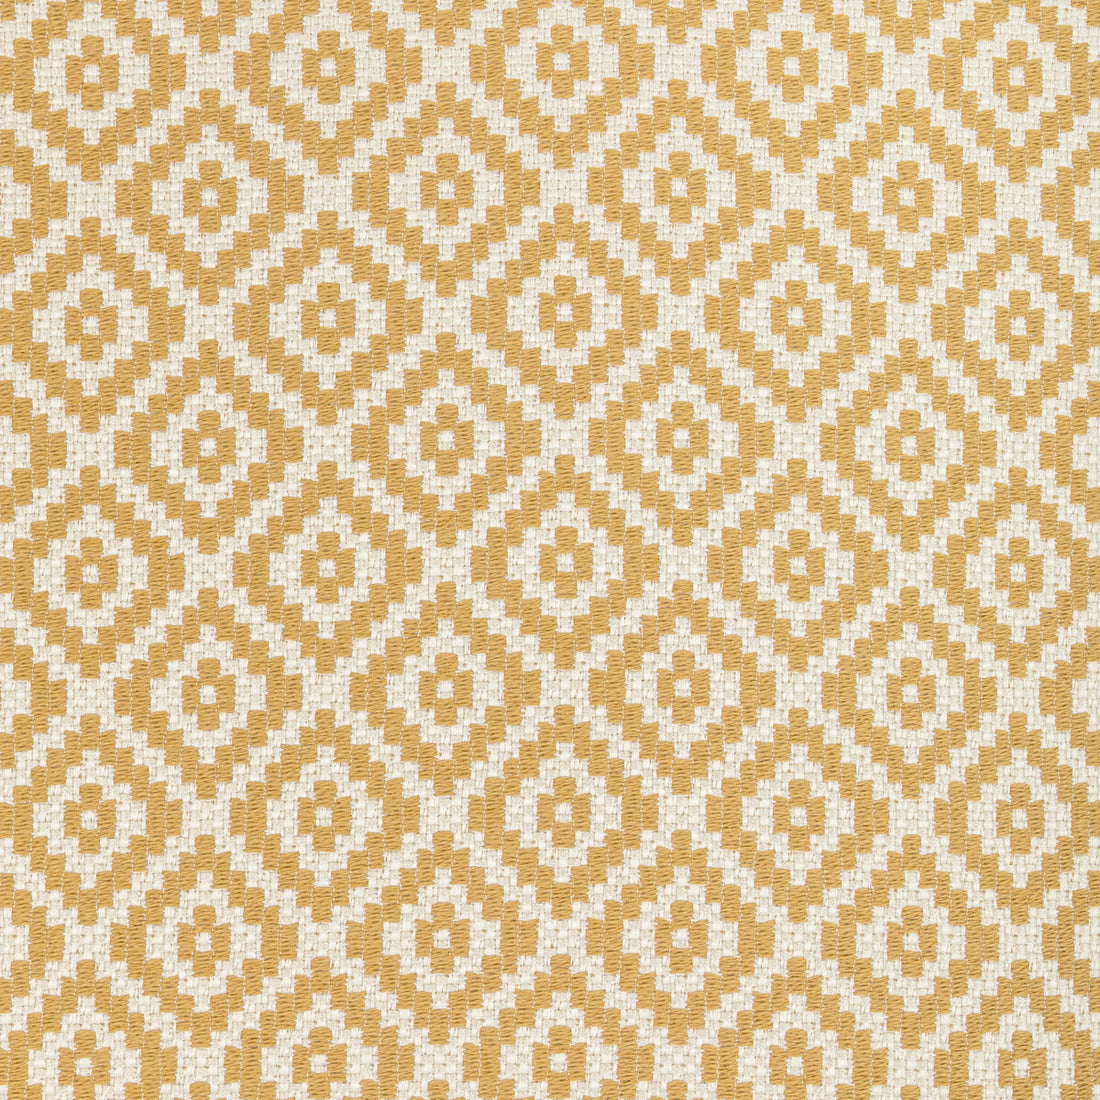 Kravet Design fabric in 36411-4 color - pattern 36411.4.0 - by Kravet Design in the Performance Crypton Home collection